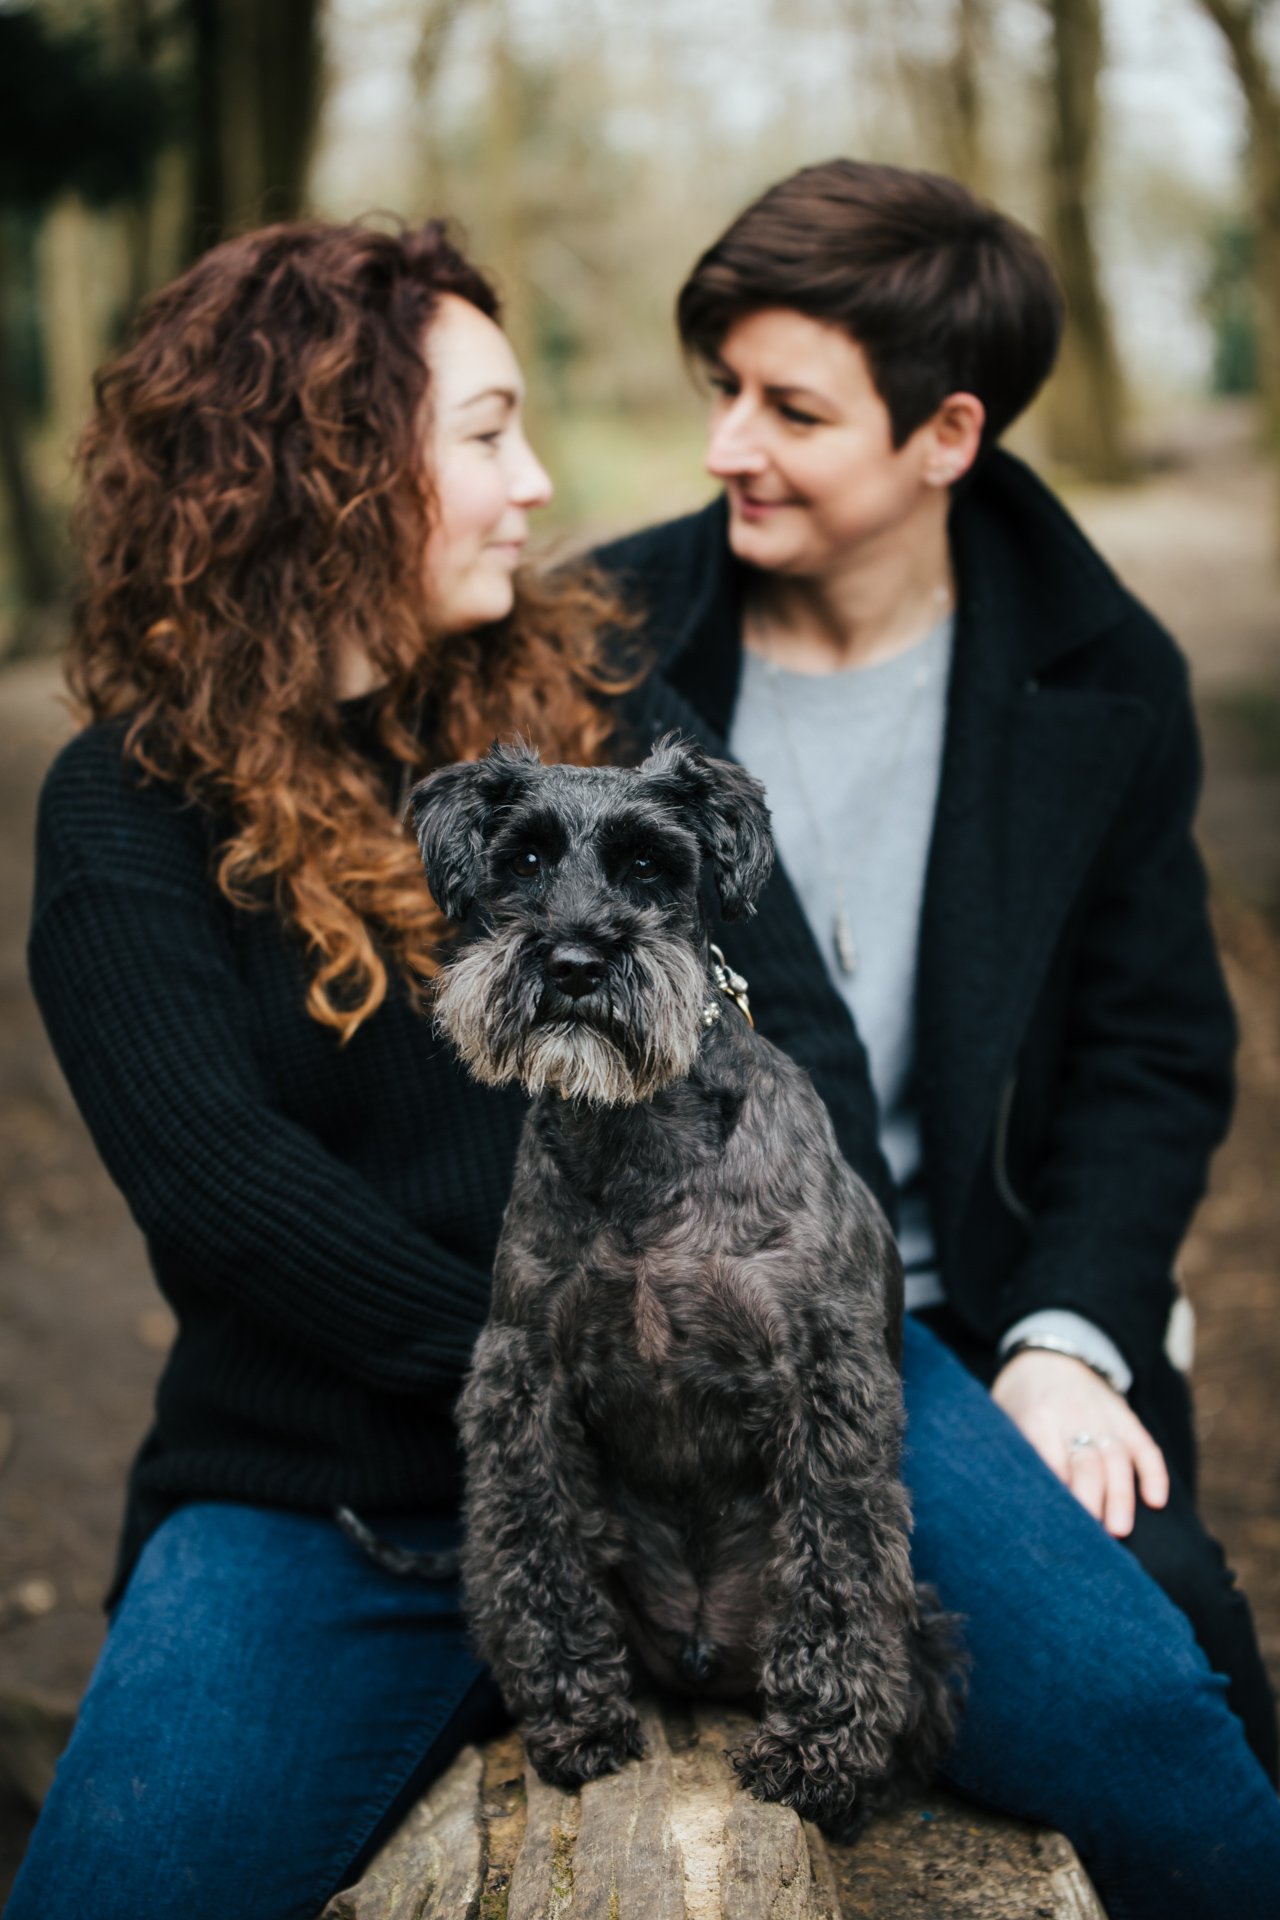 Two gorgeous ladies smiling with their dog during their engagement shoot in a woodland setting in Kent